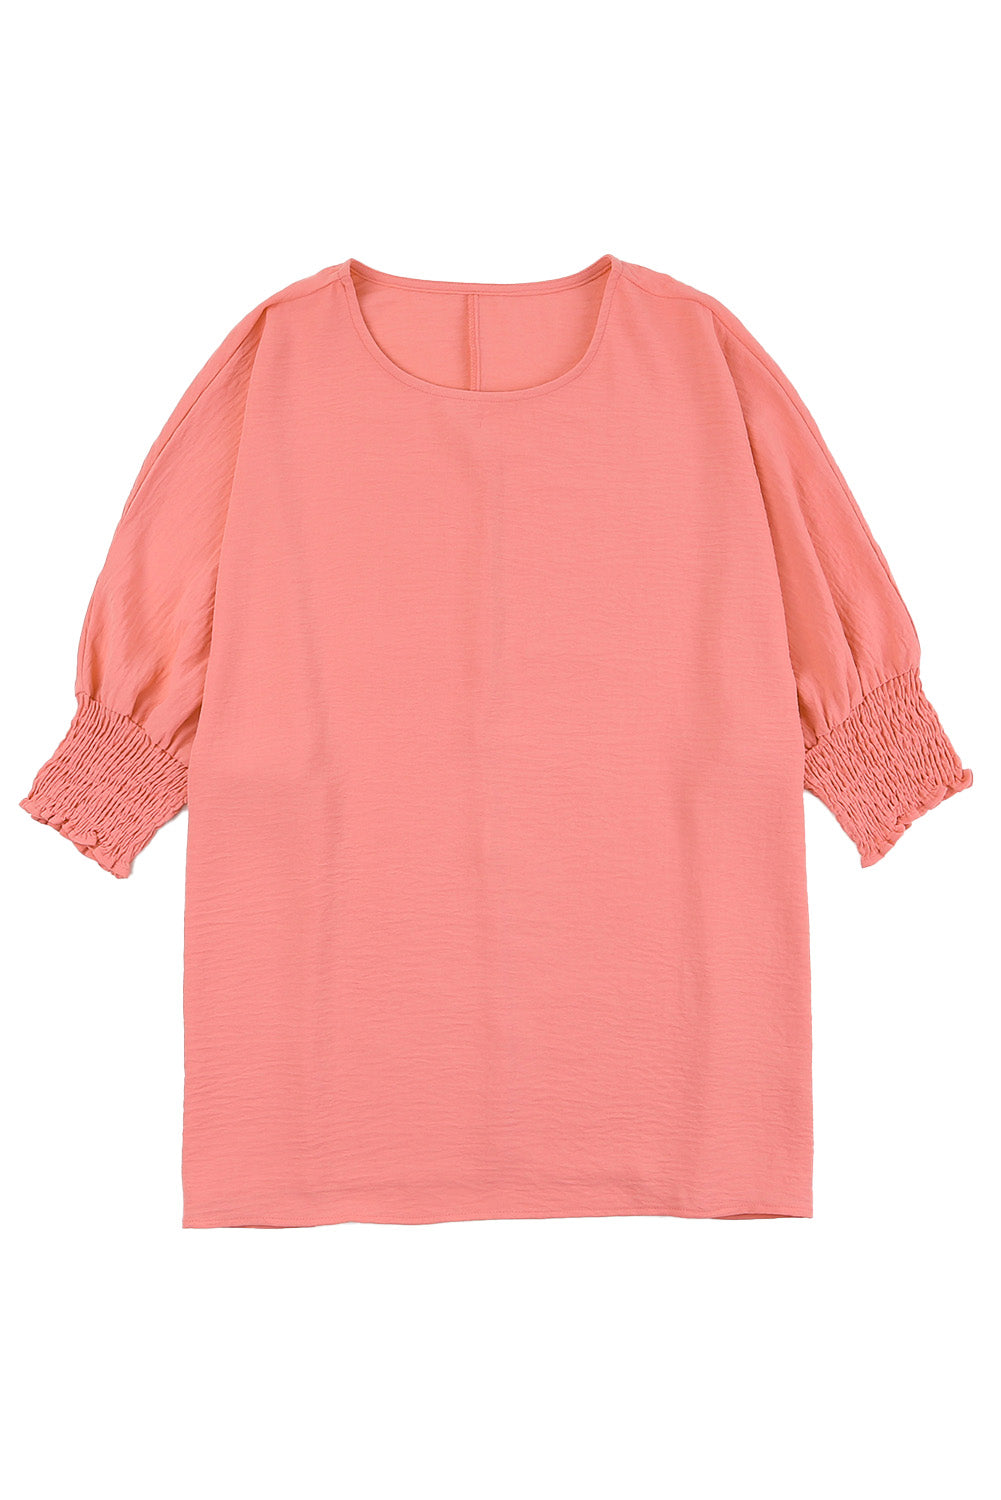 Chic Pink Shift Top with Smocked Wrist Detail